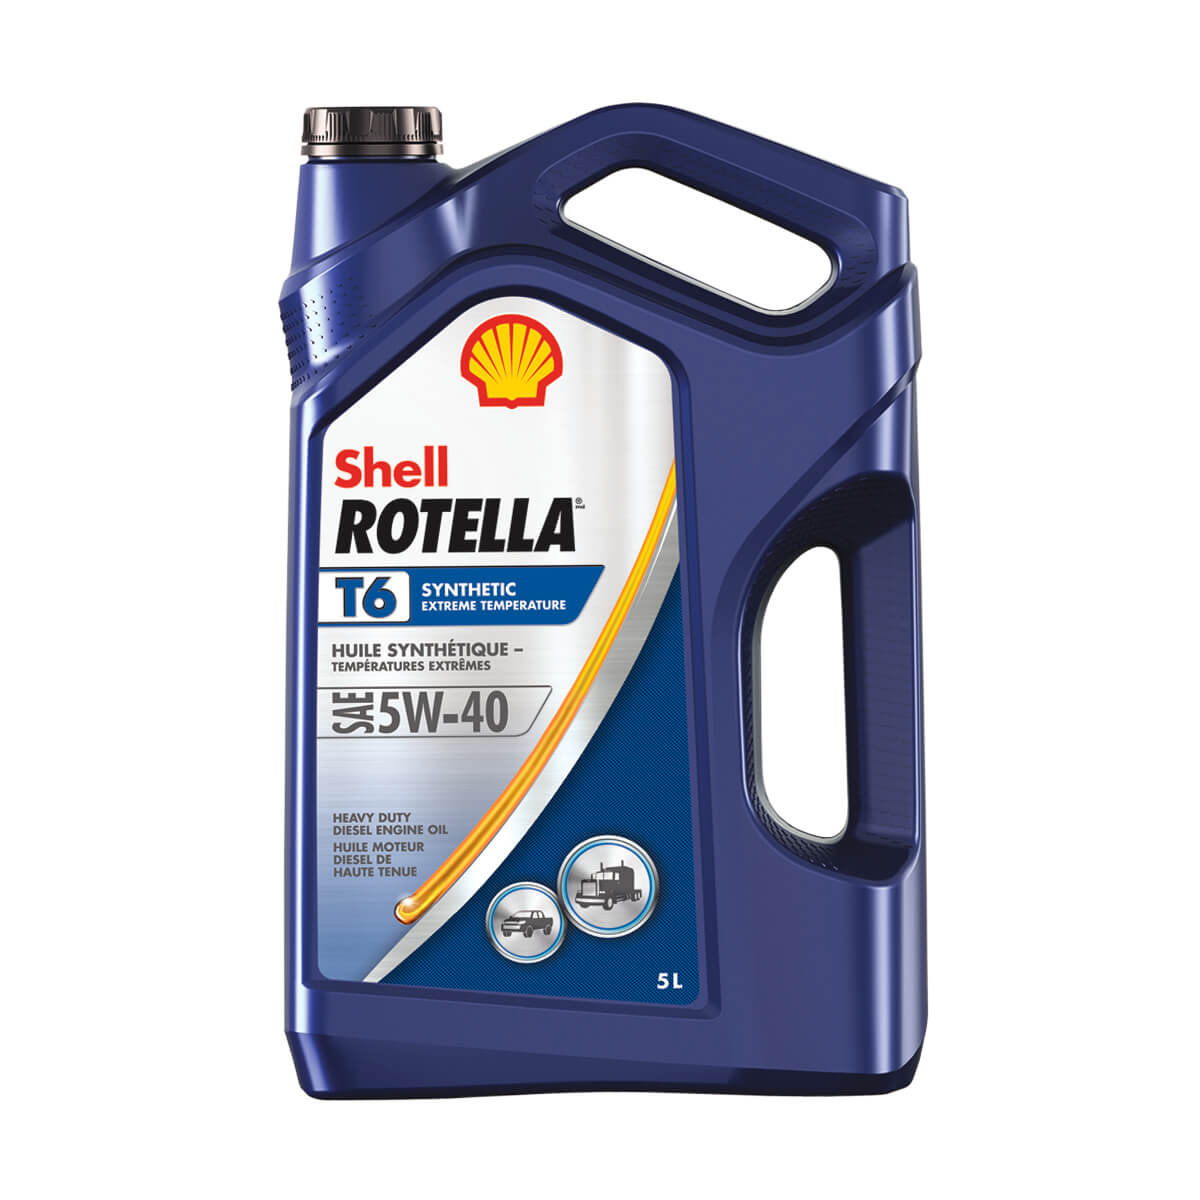 Shell Rotella T6 Triple Protection Synthetic 5W-40 - 5 L